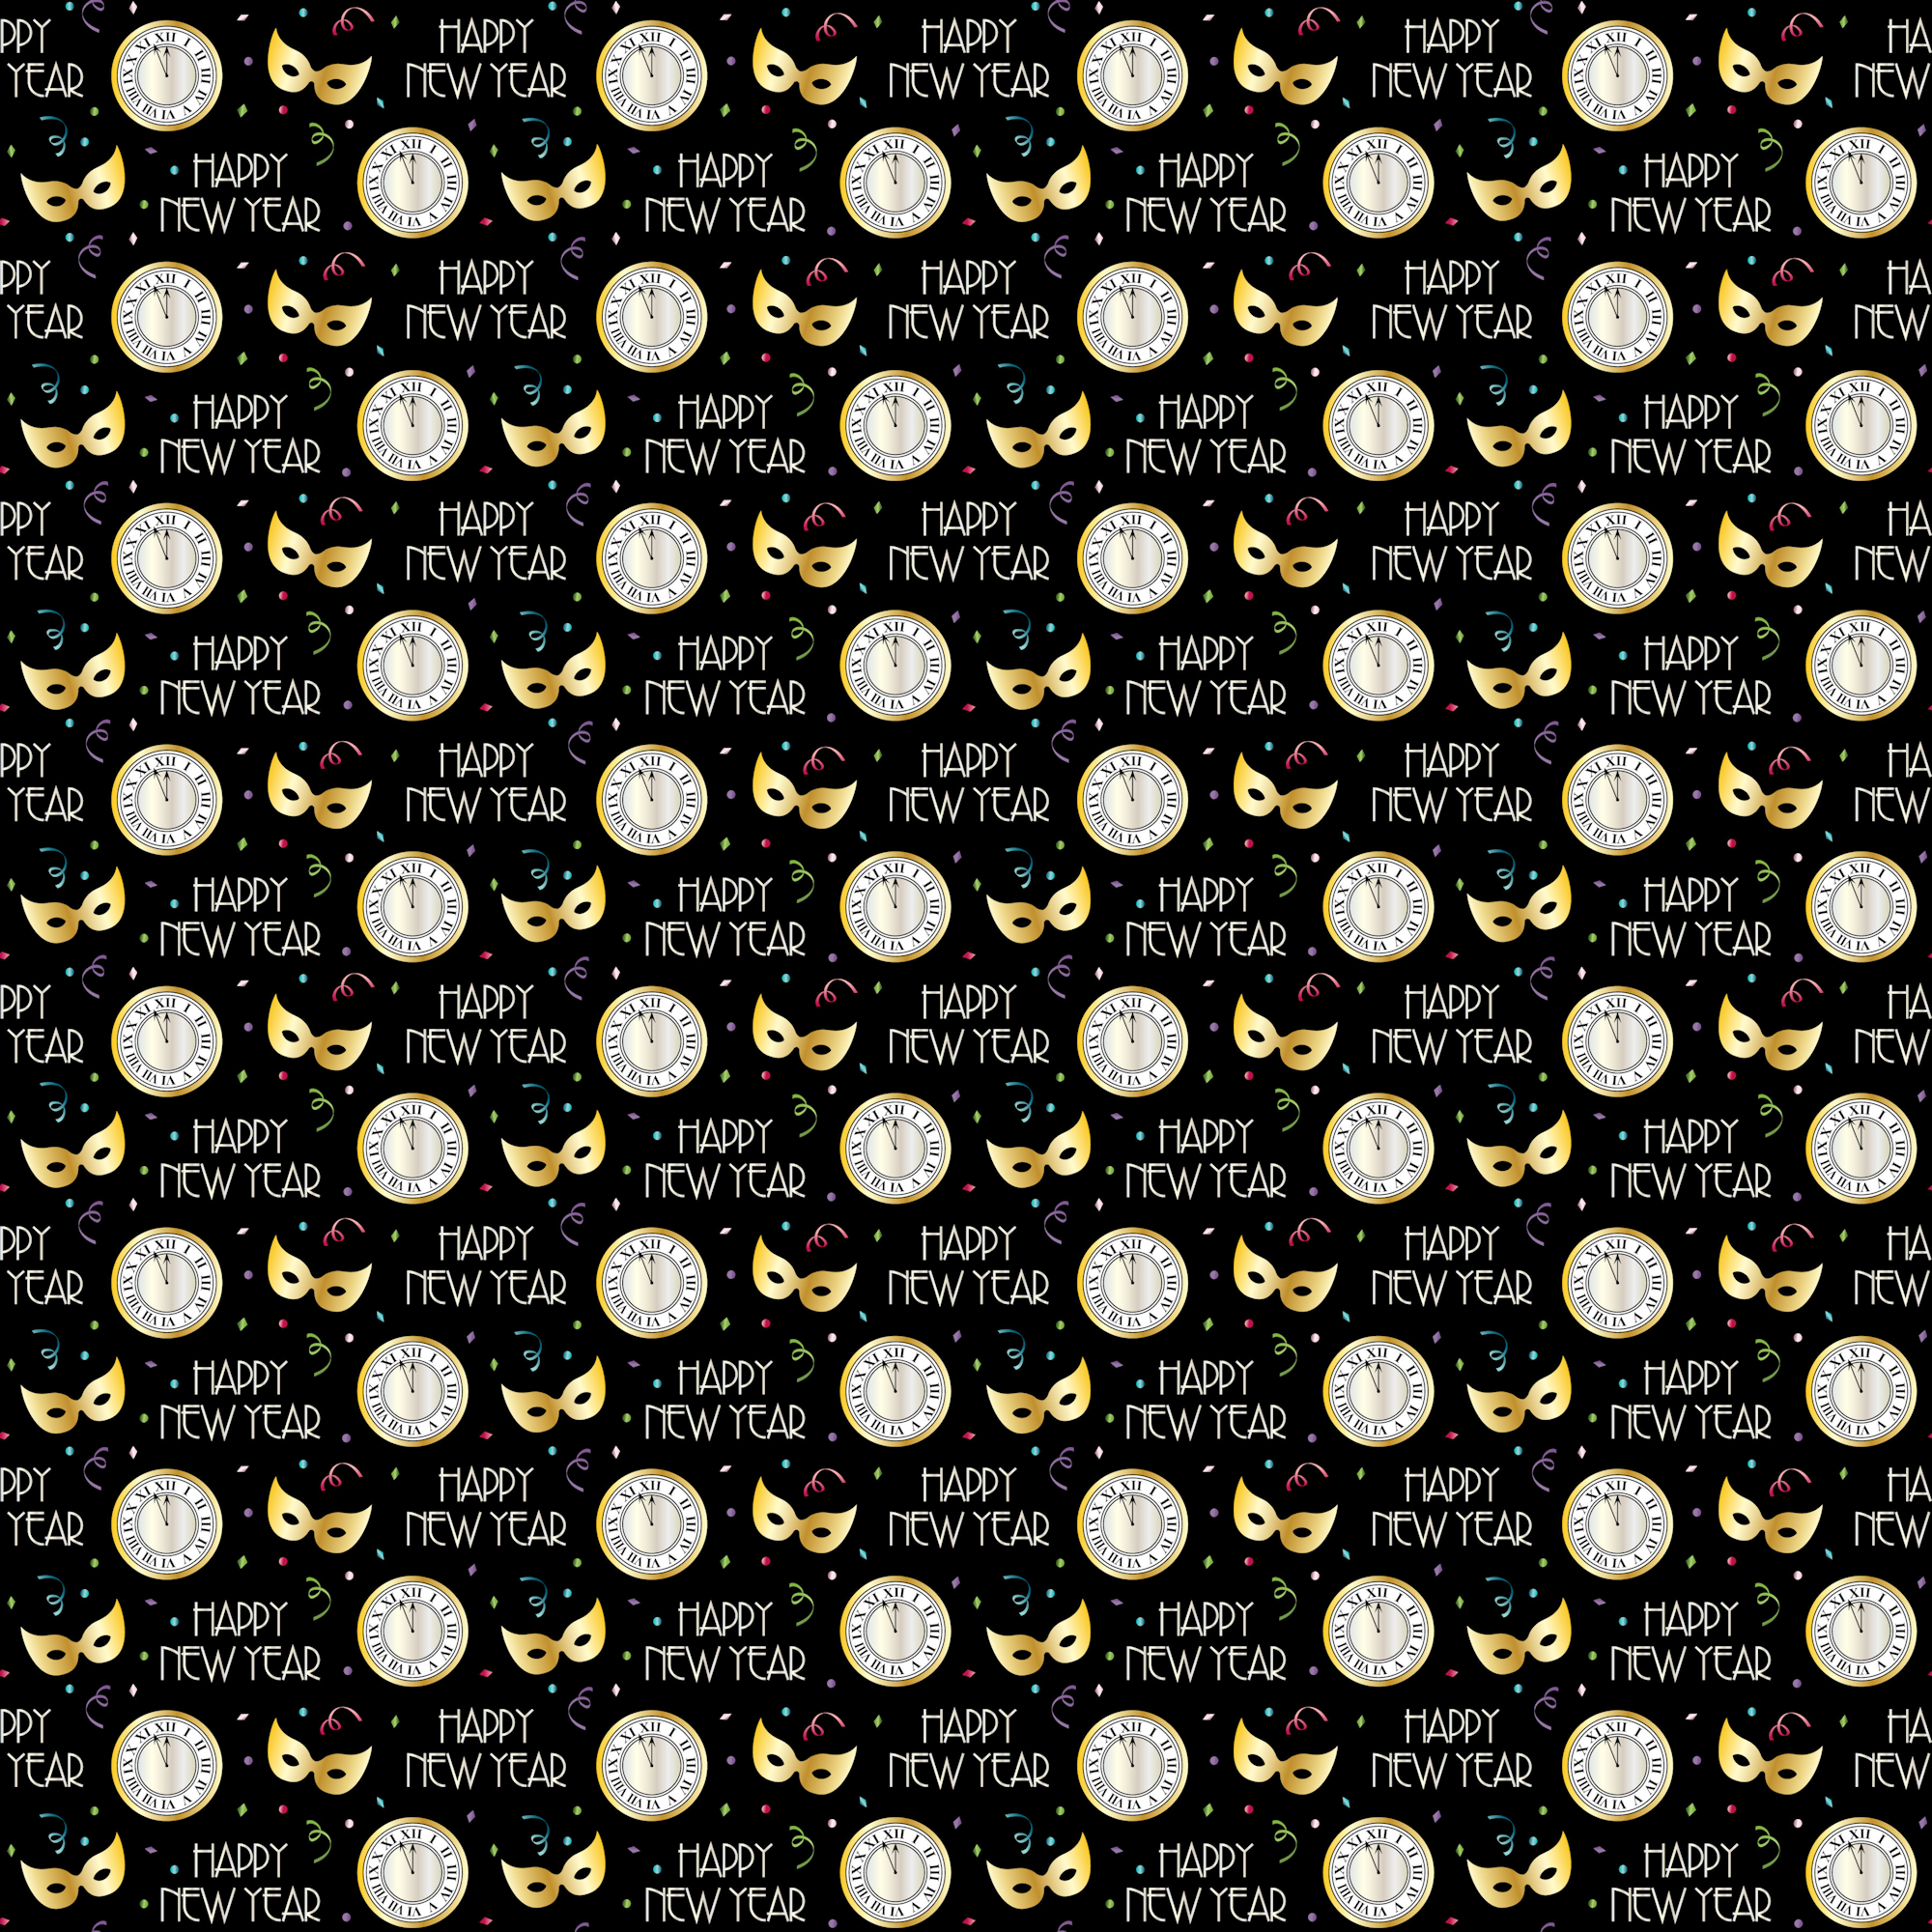 Happy New Year Collection Countdown to the New Year 12 x 12 Double-Sided Scrapbook Paper by SSC Designs